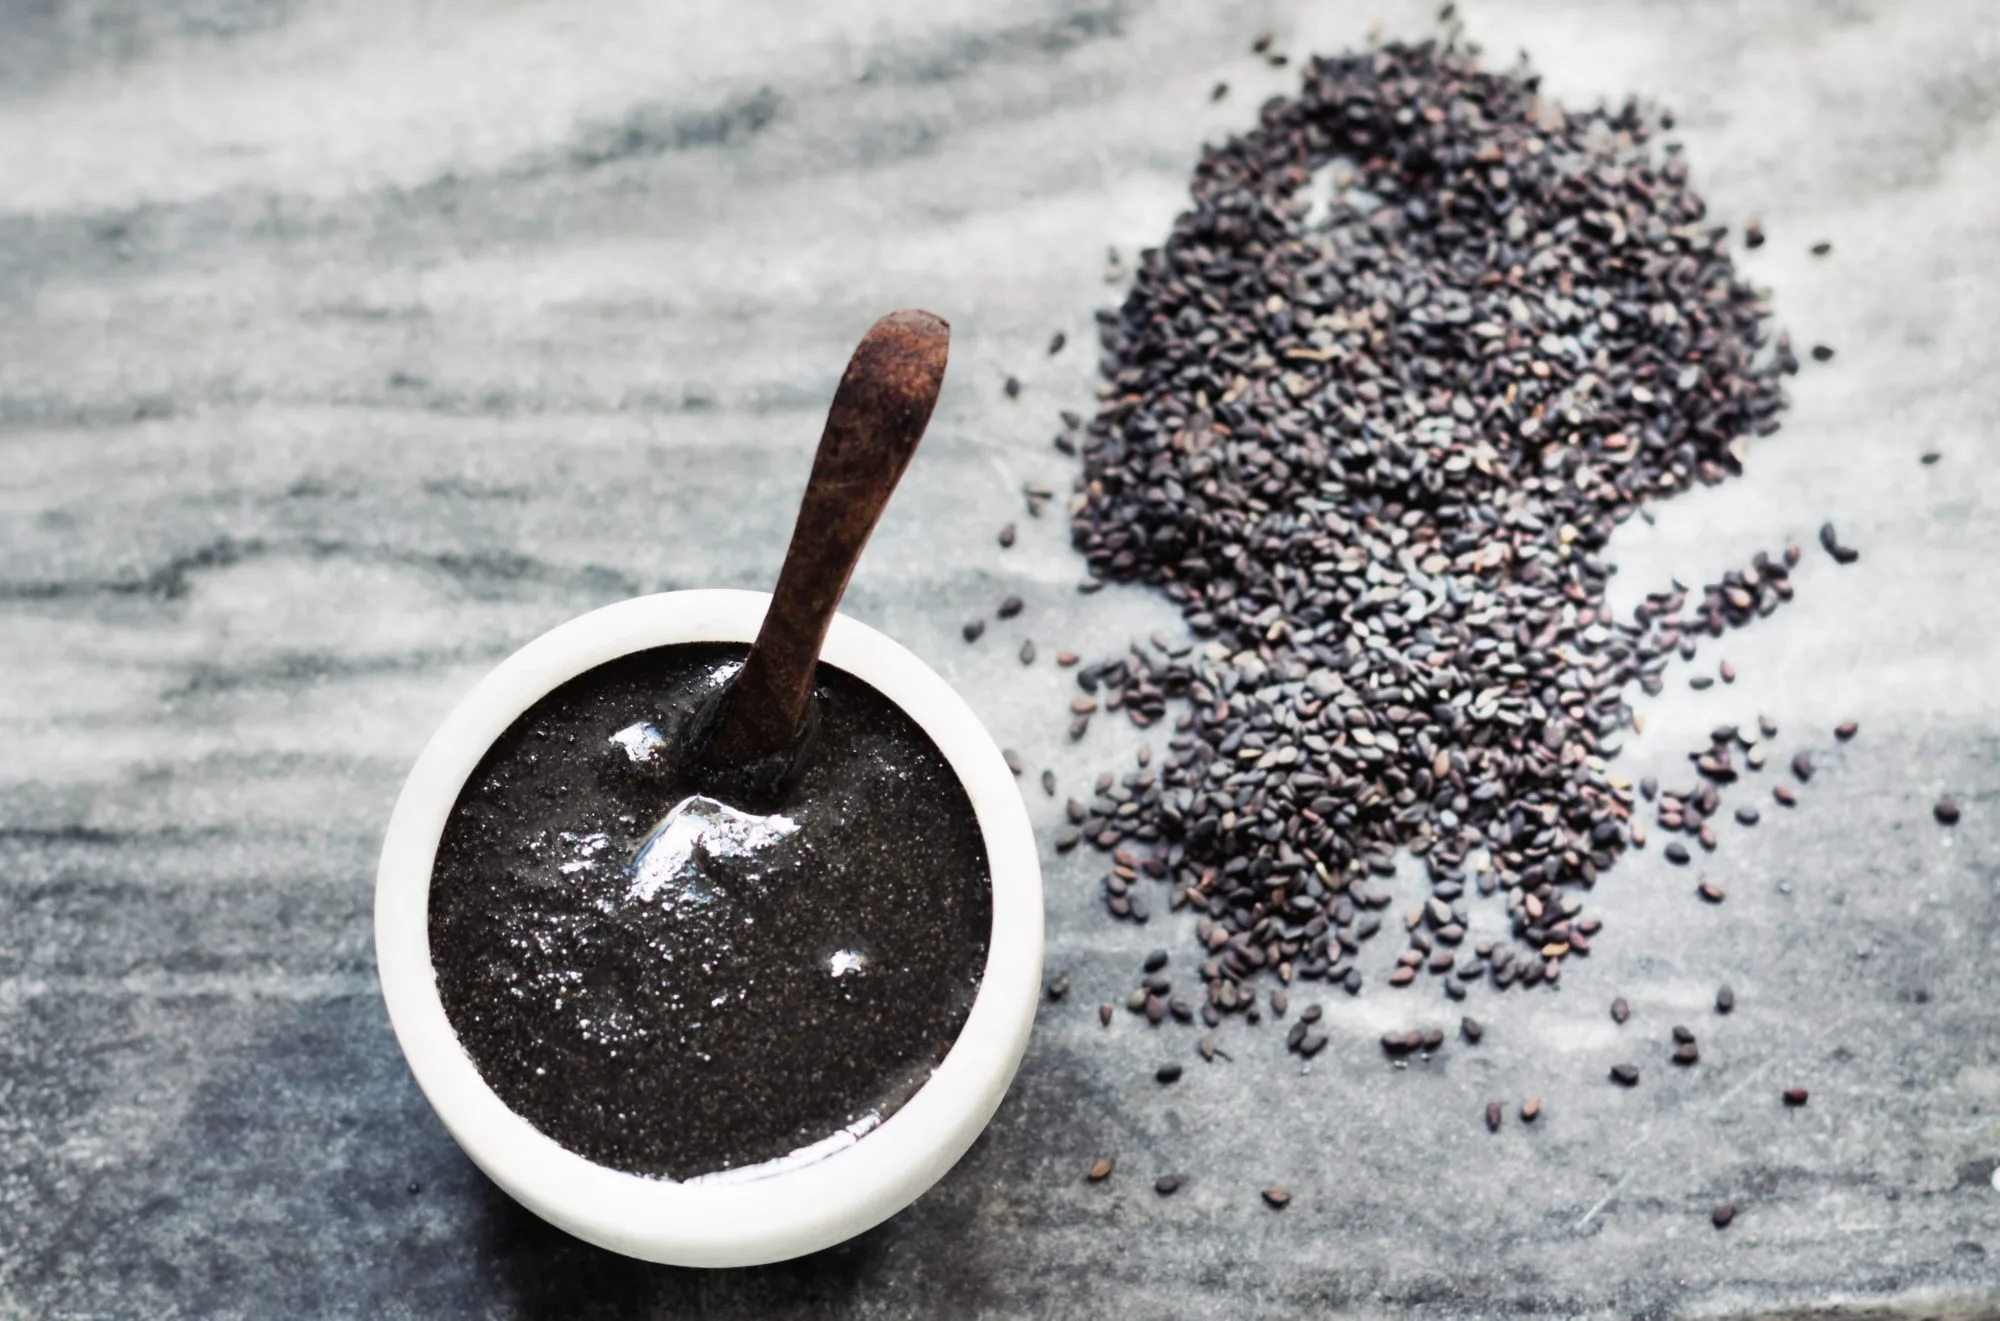 Black Cumin Seeds: Why We Love Them And Their Oil